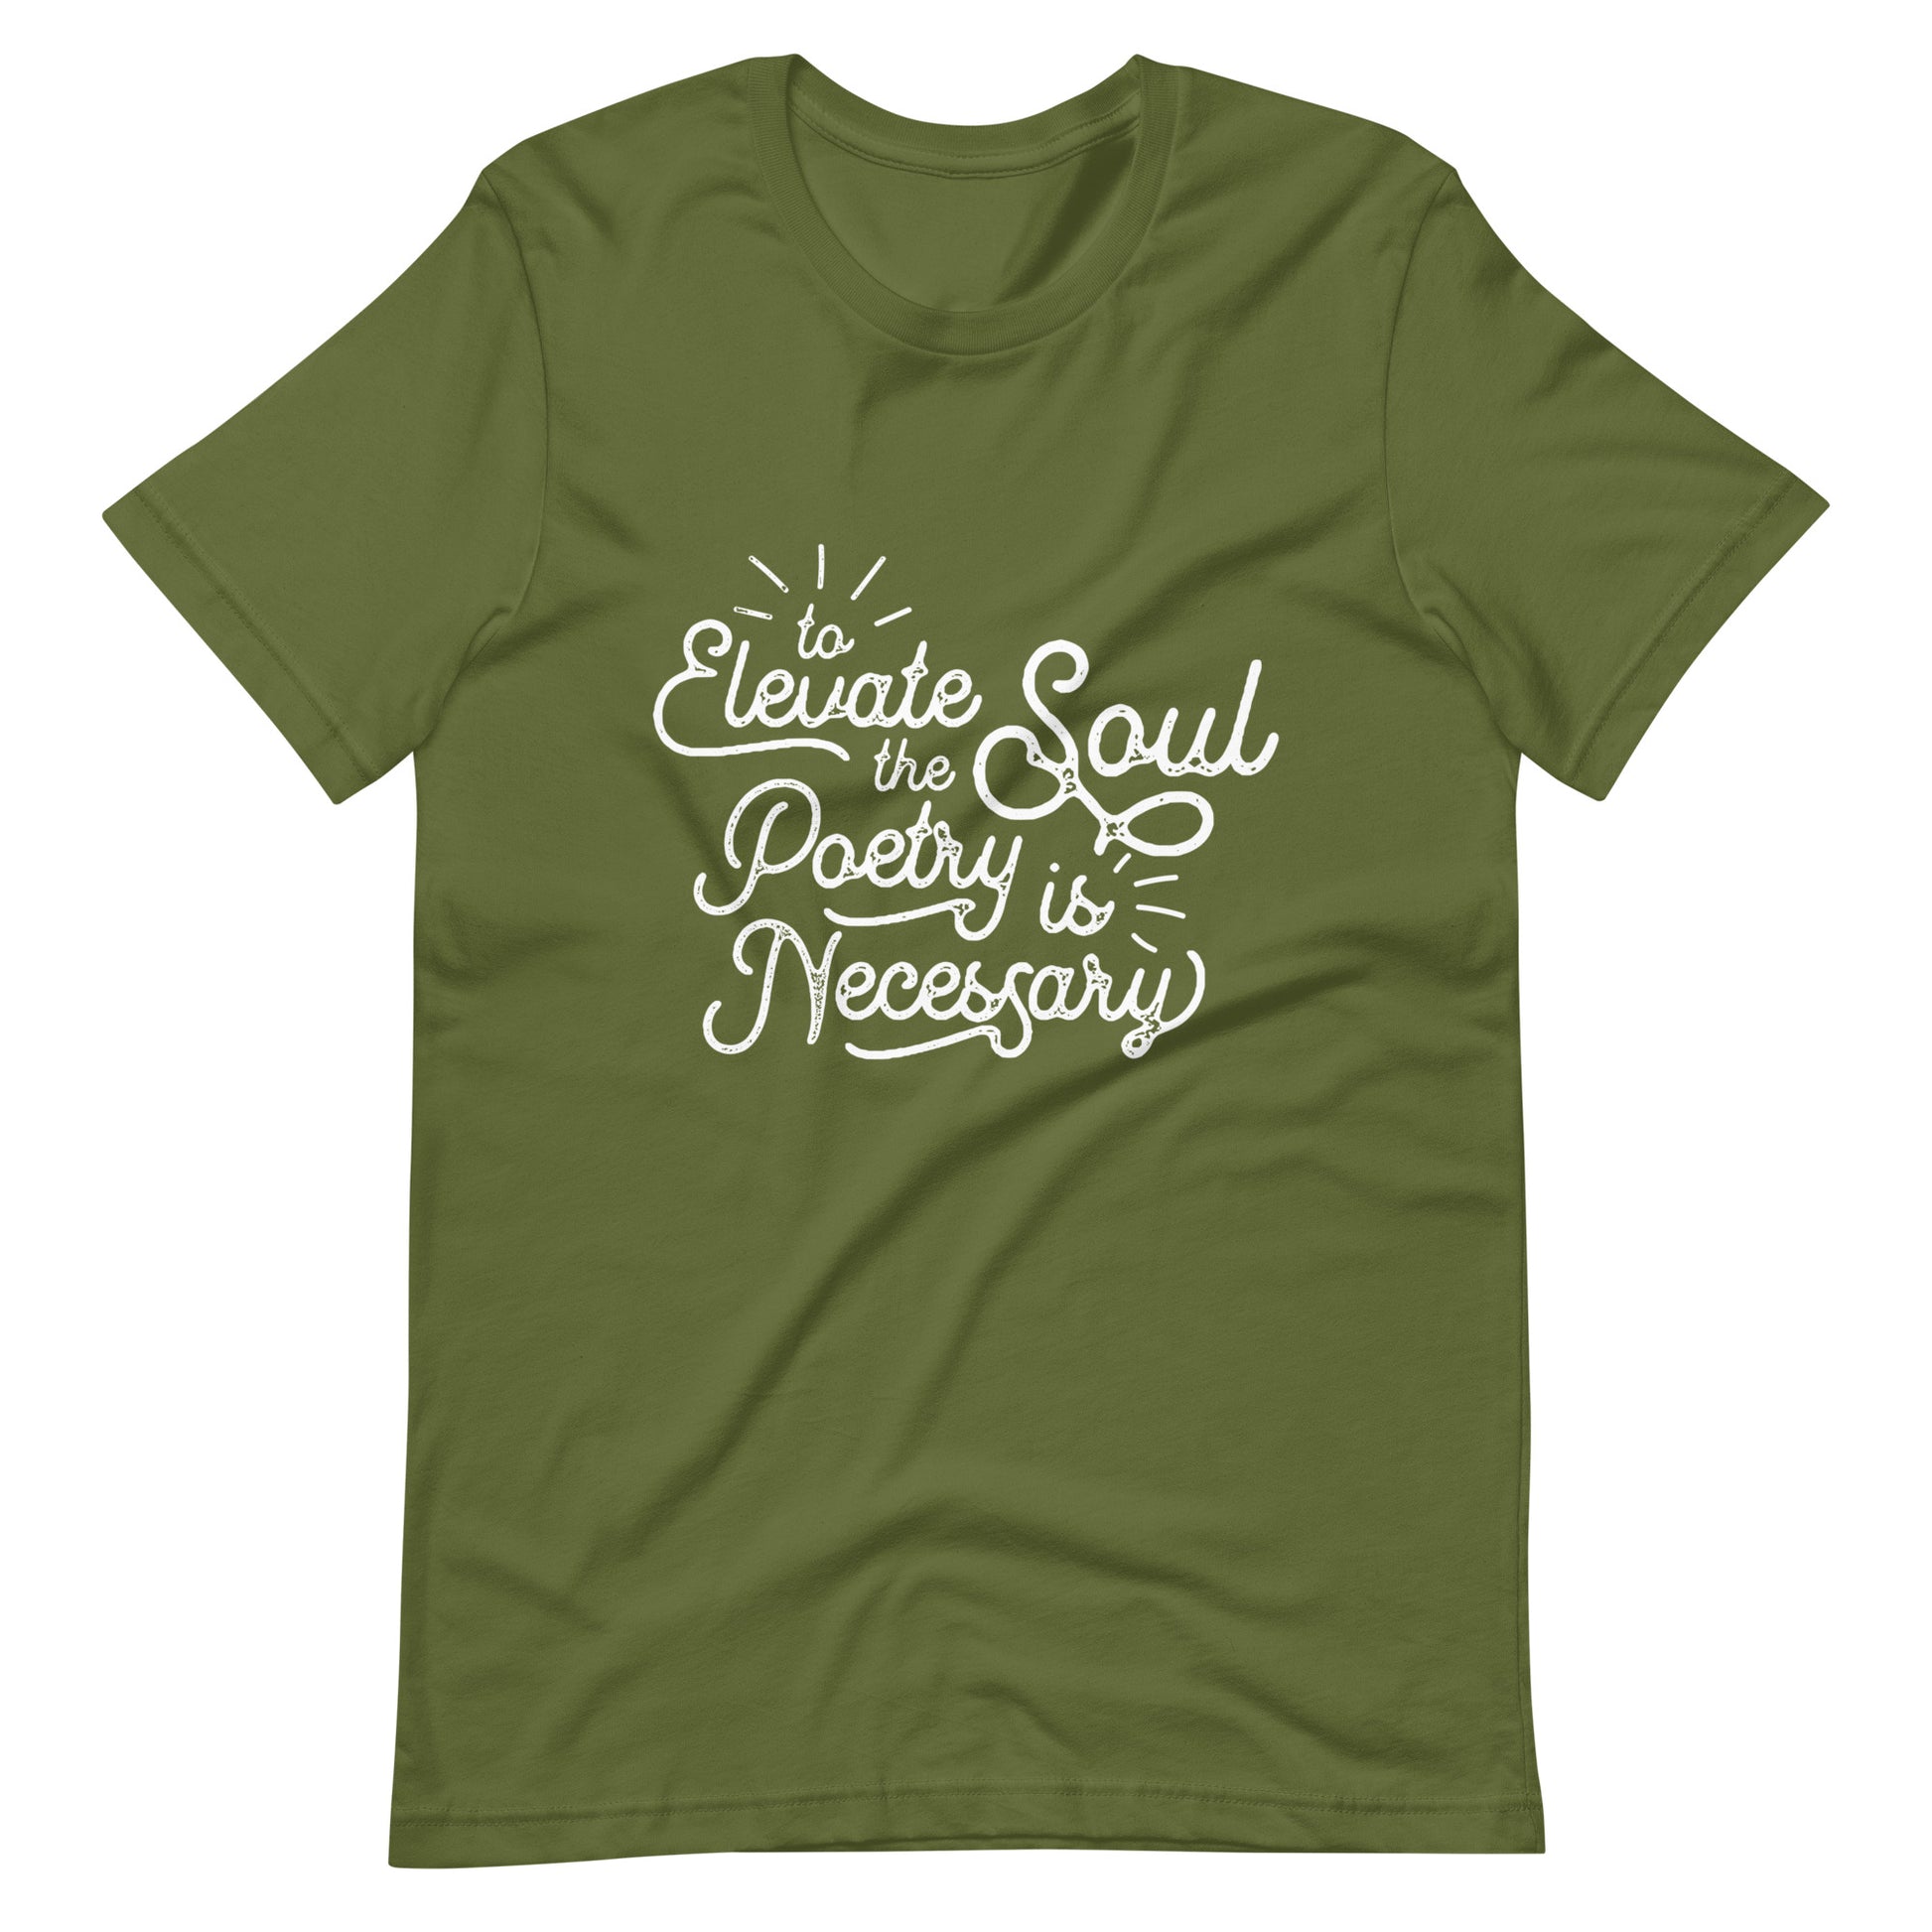 To Elevate the Soul Edgar Allan Poe Quote - Men's t-shirt - Olive Front